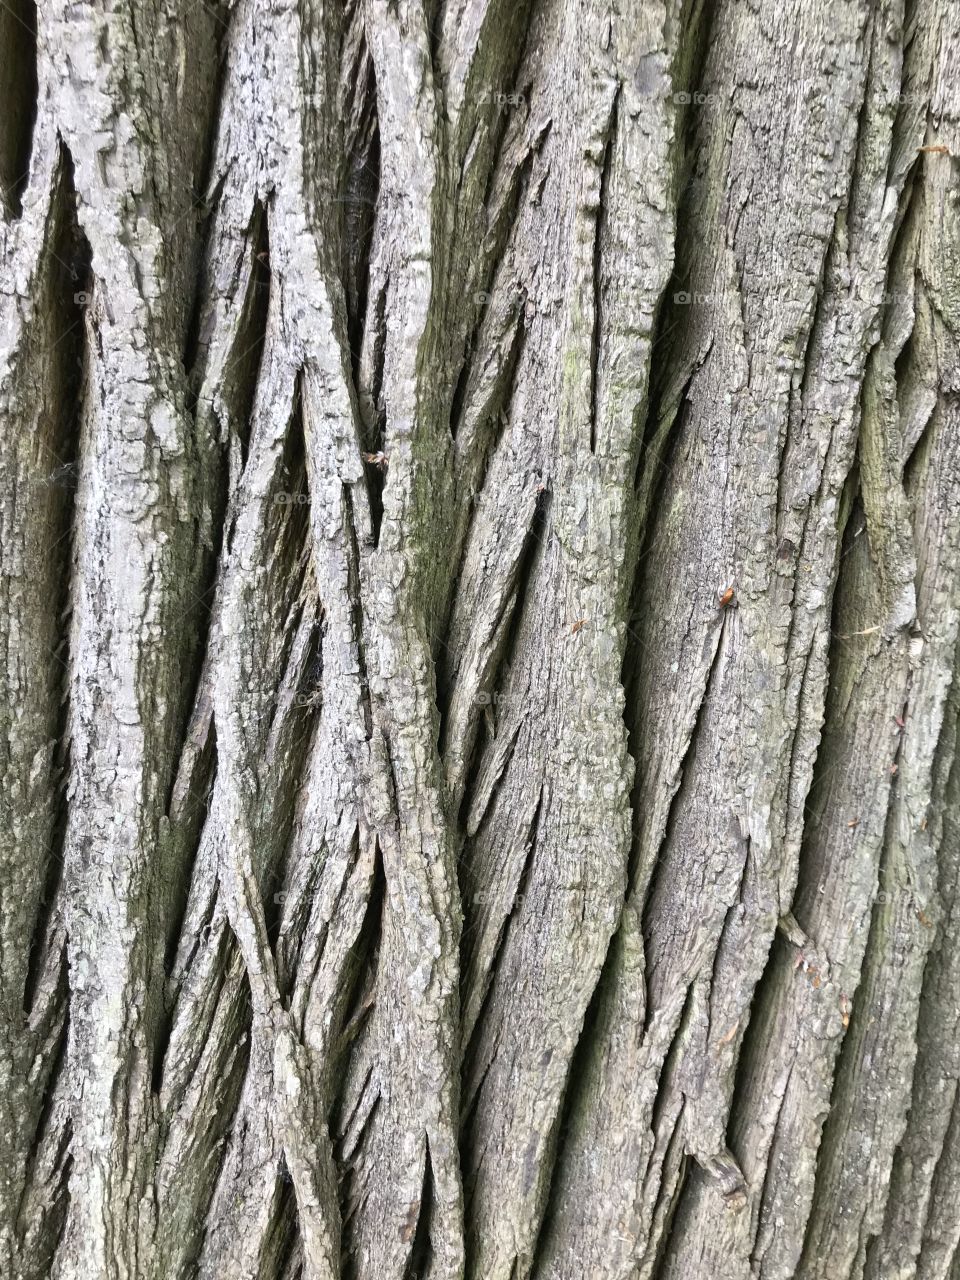 The bark of one of the very nature majestical trees in this lovely garden in Devon.